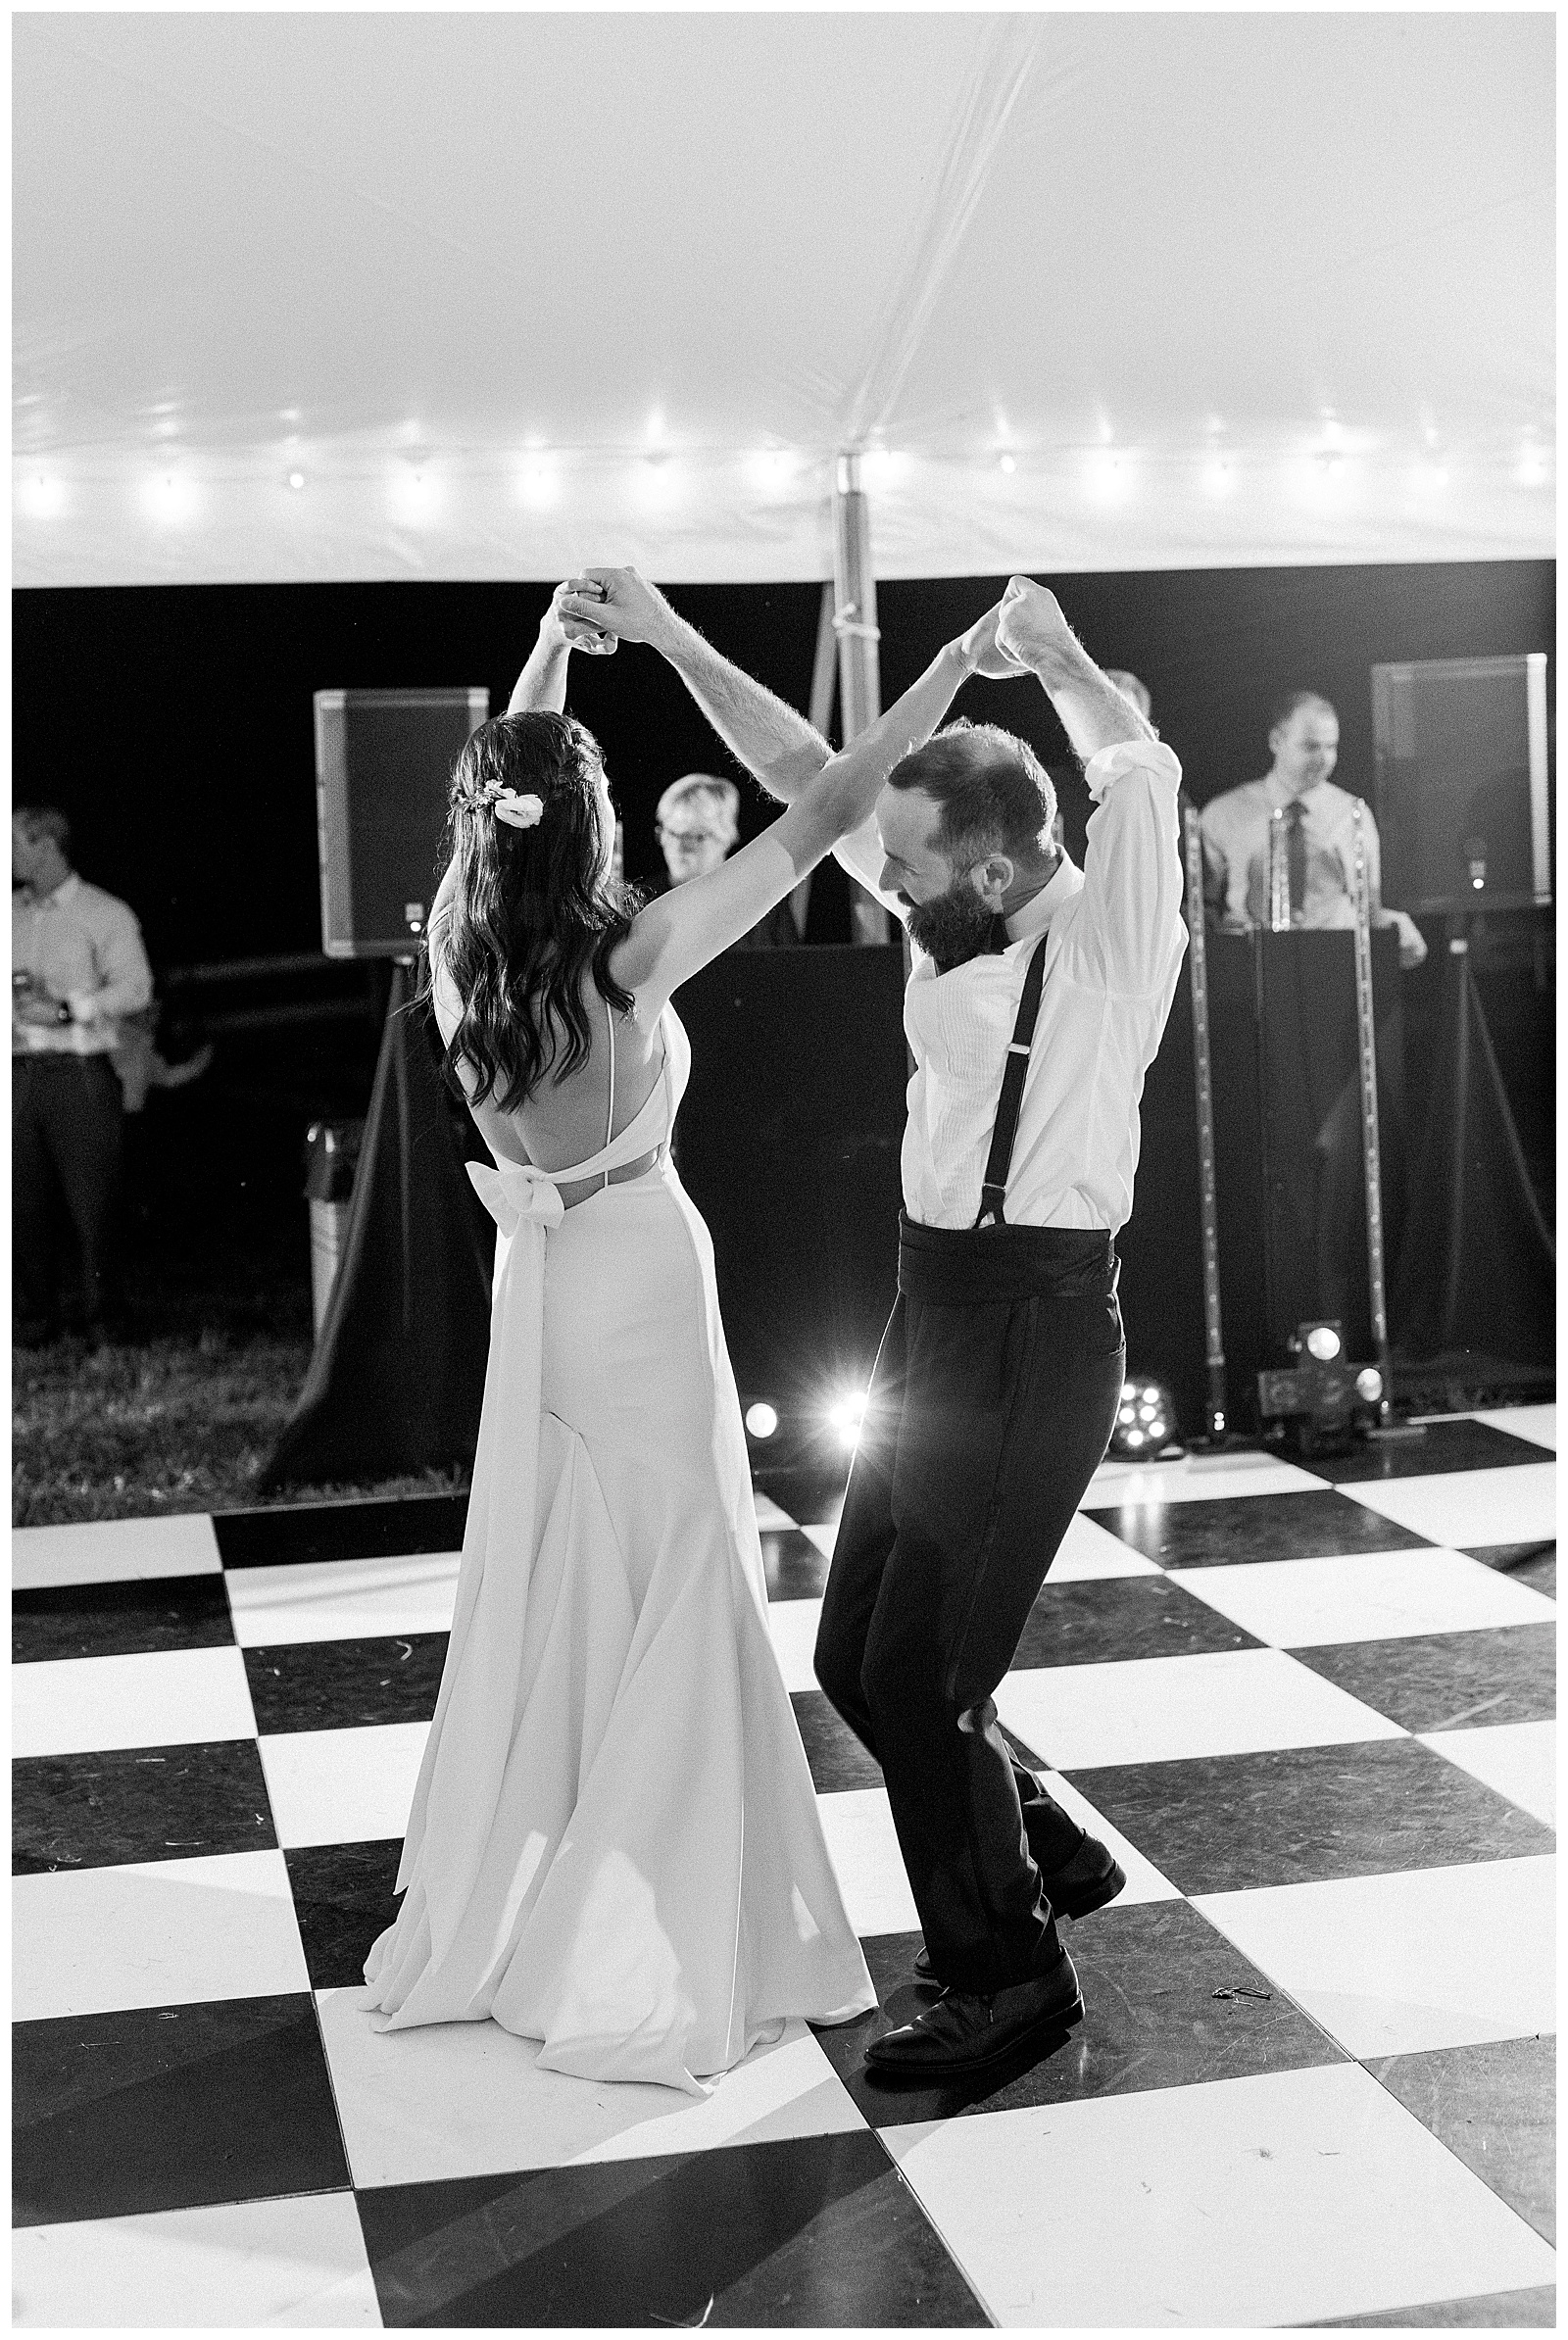 wedding reception dancing in black and white
